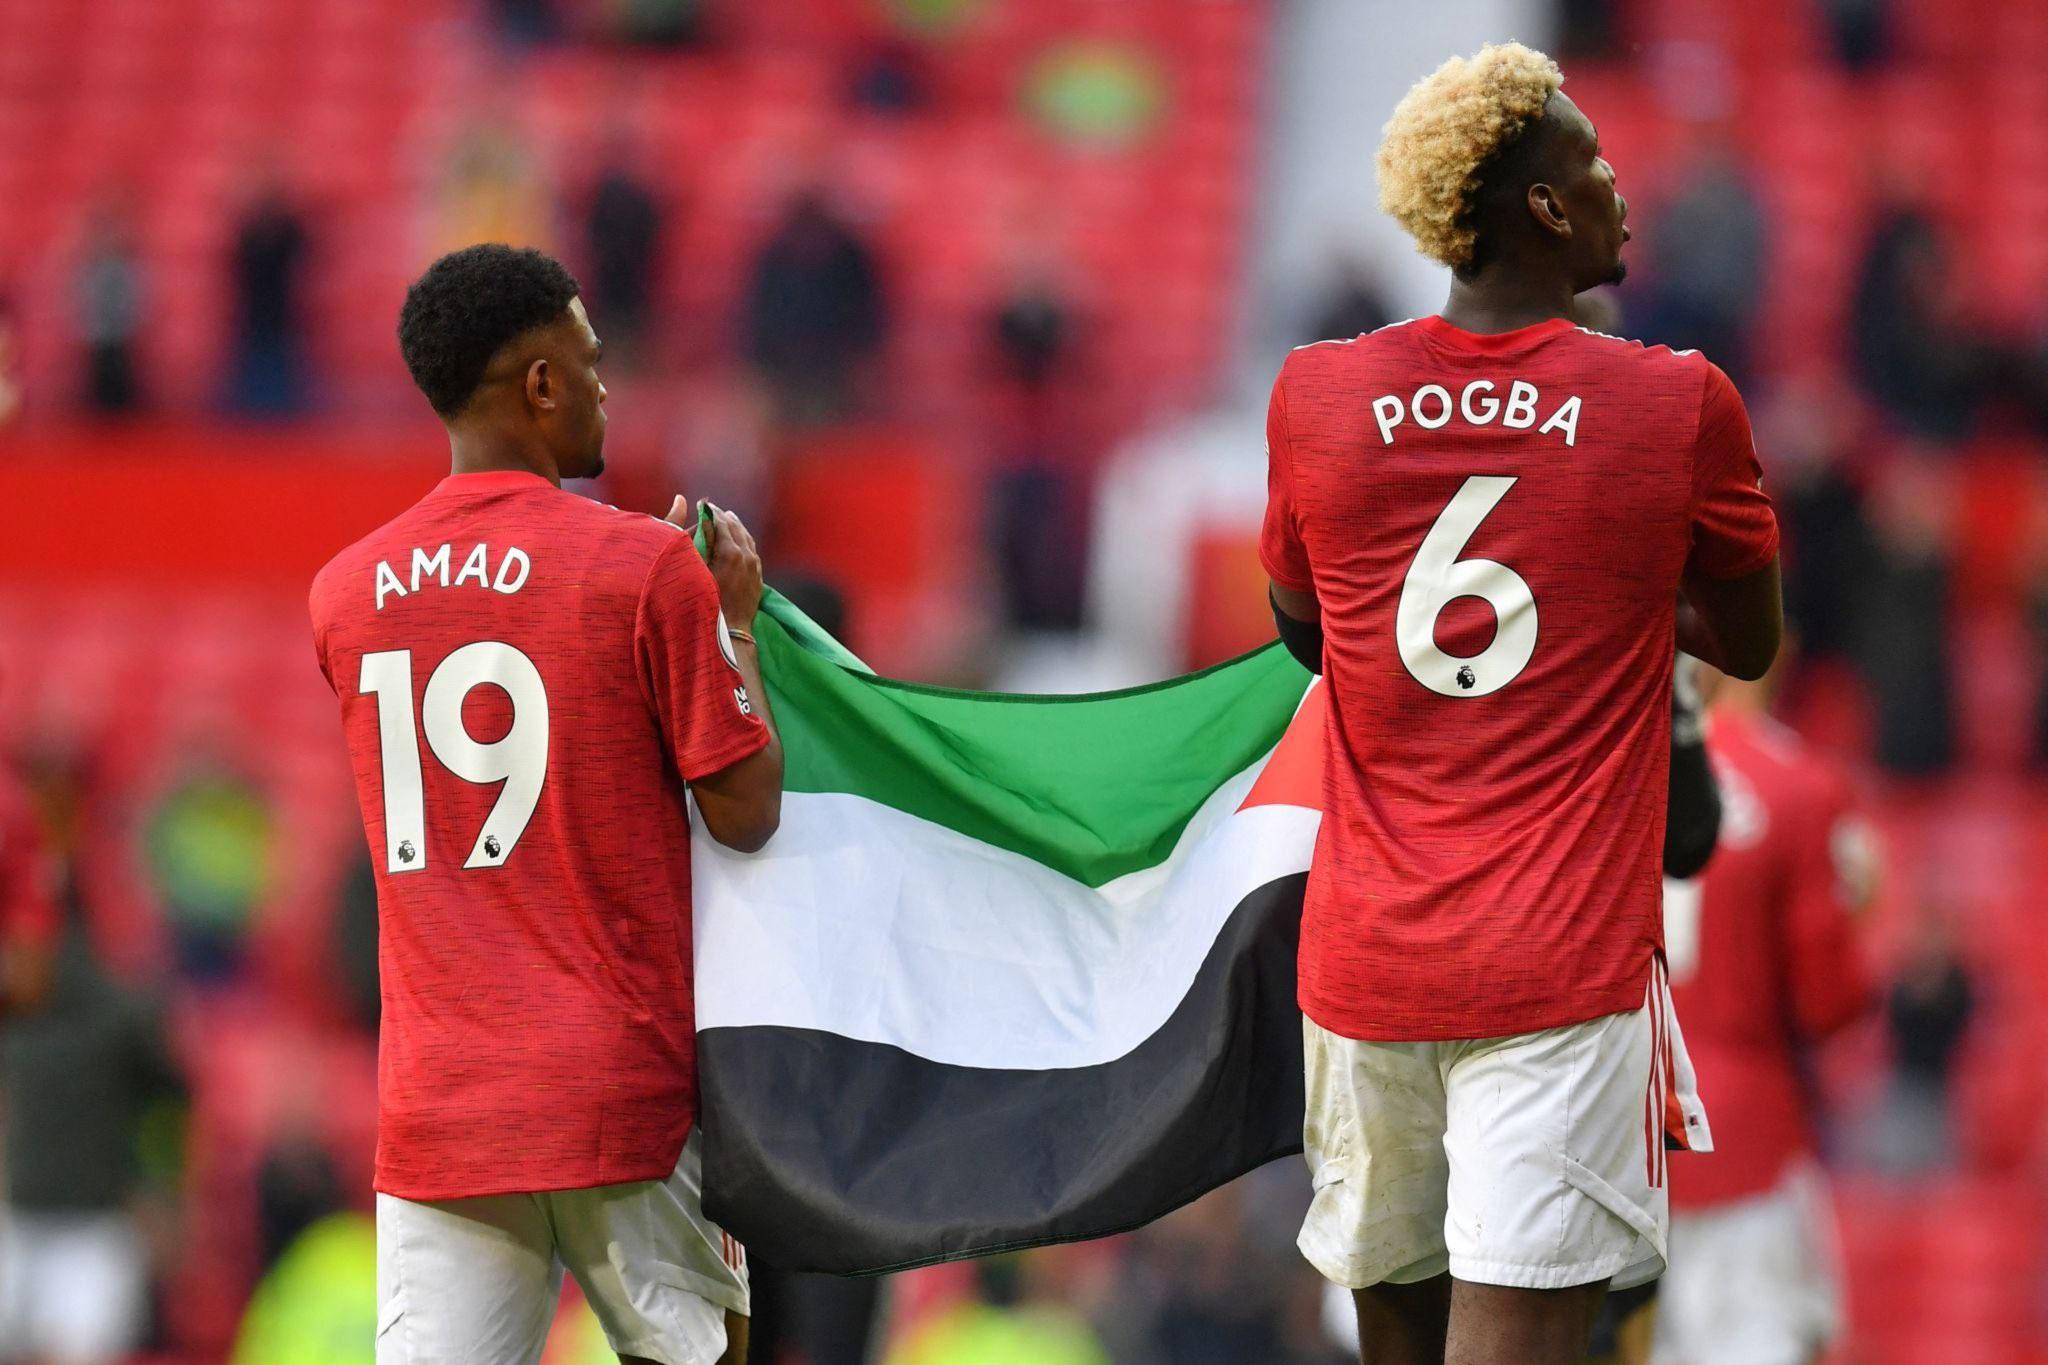 Solskjaer Backs Manchester United Duo Pogba And Amad For Displaying The Palestinian Flag At Old Trafford